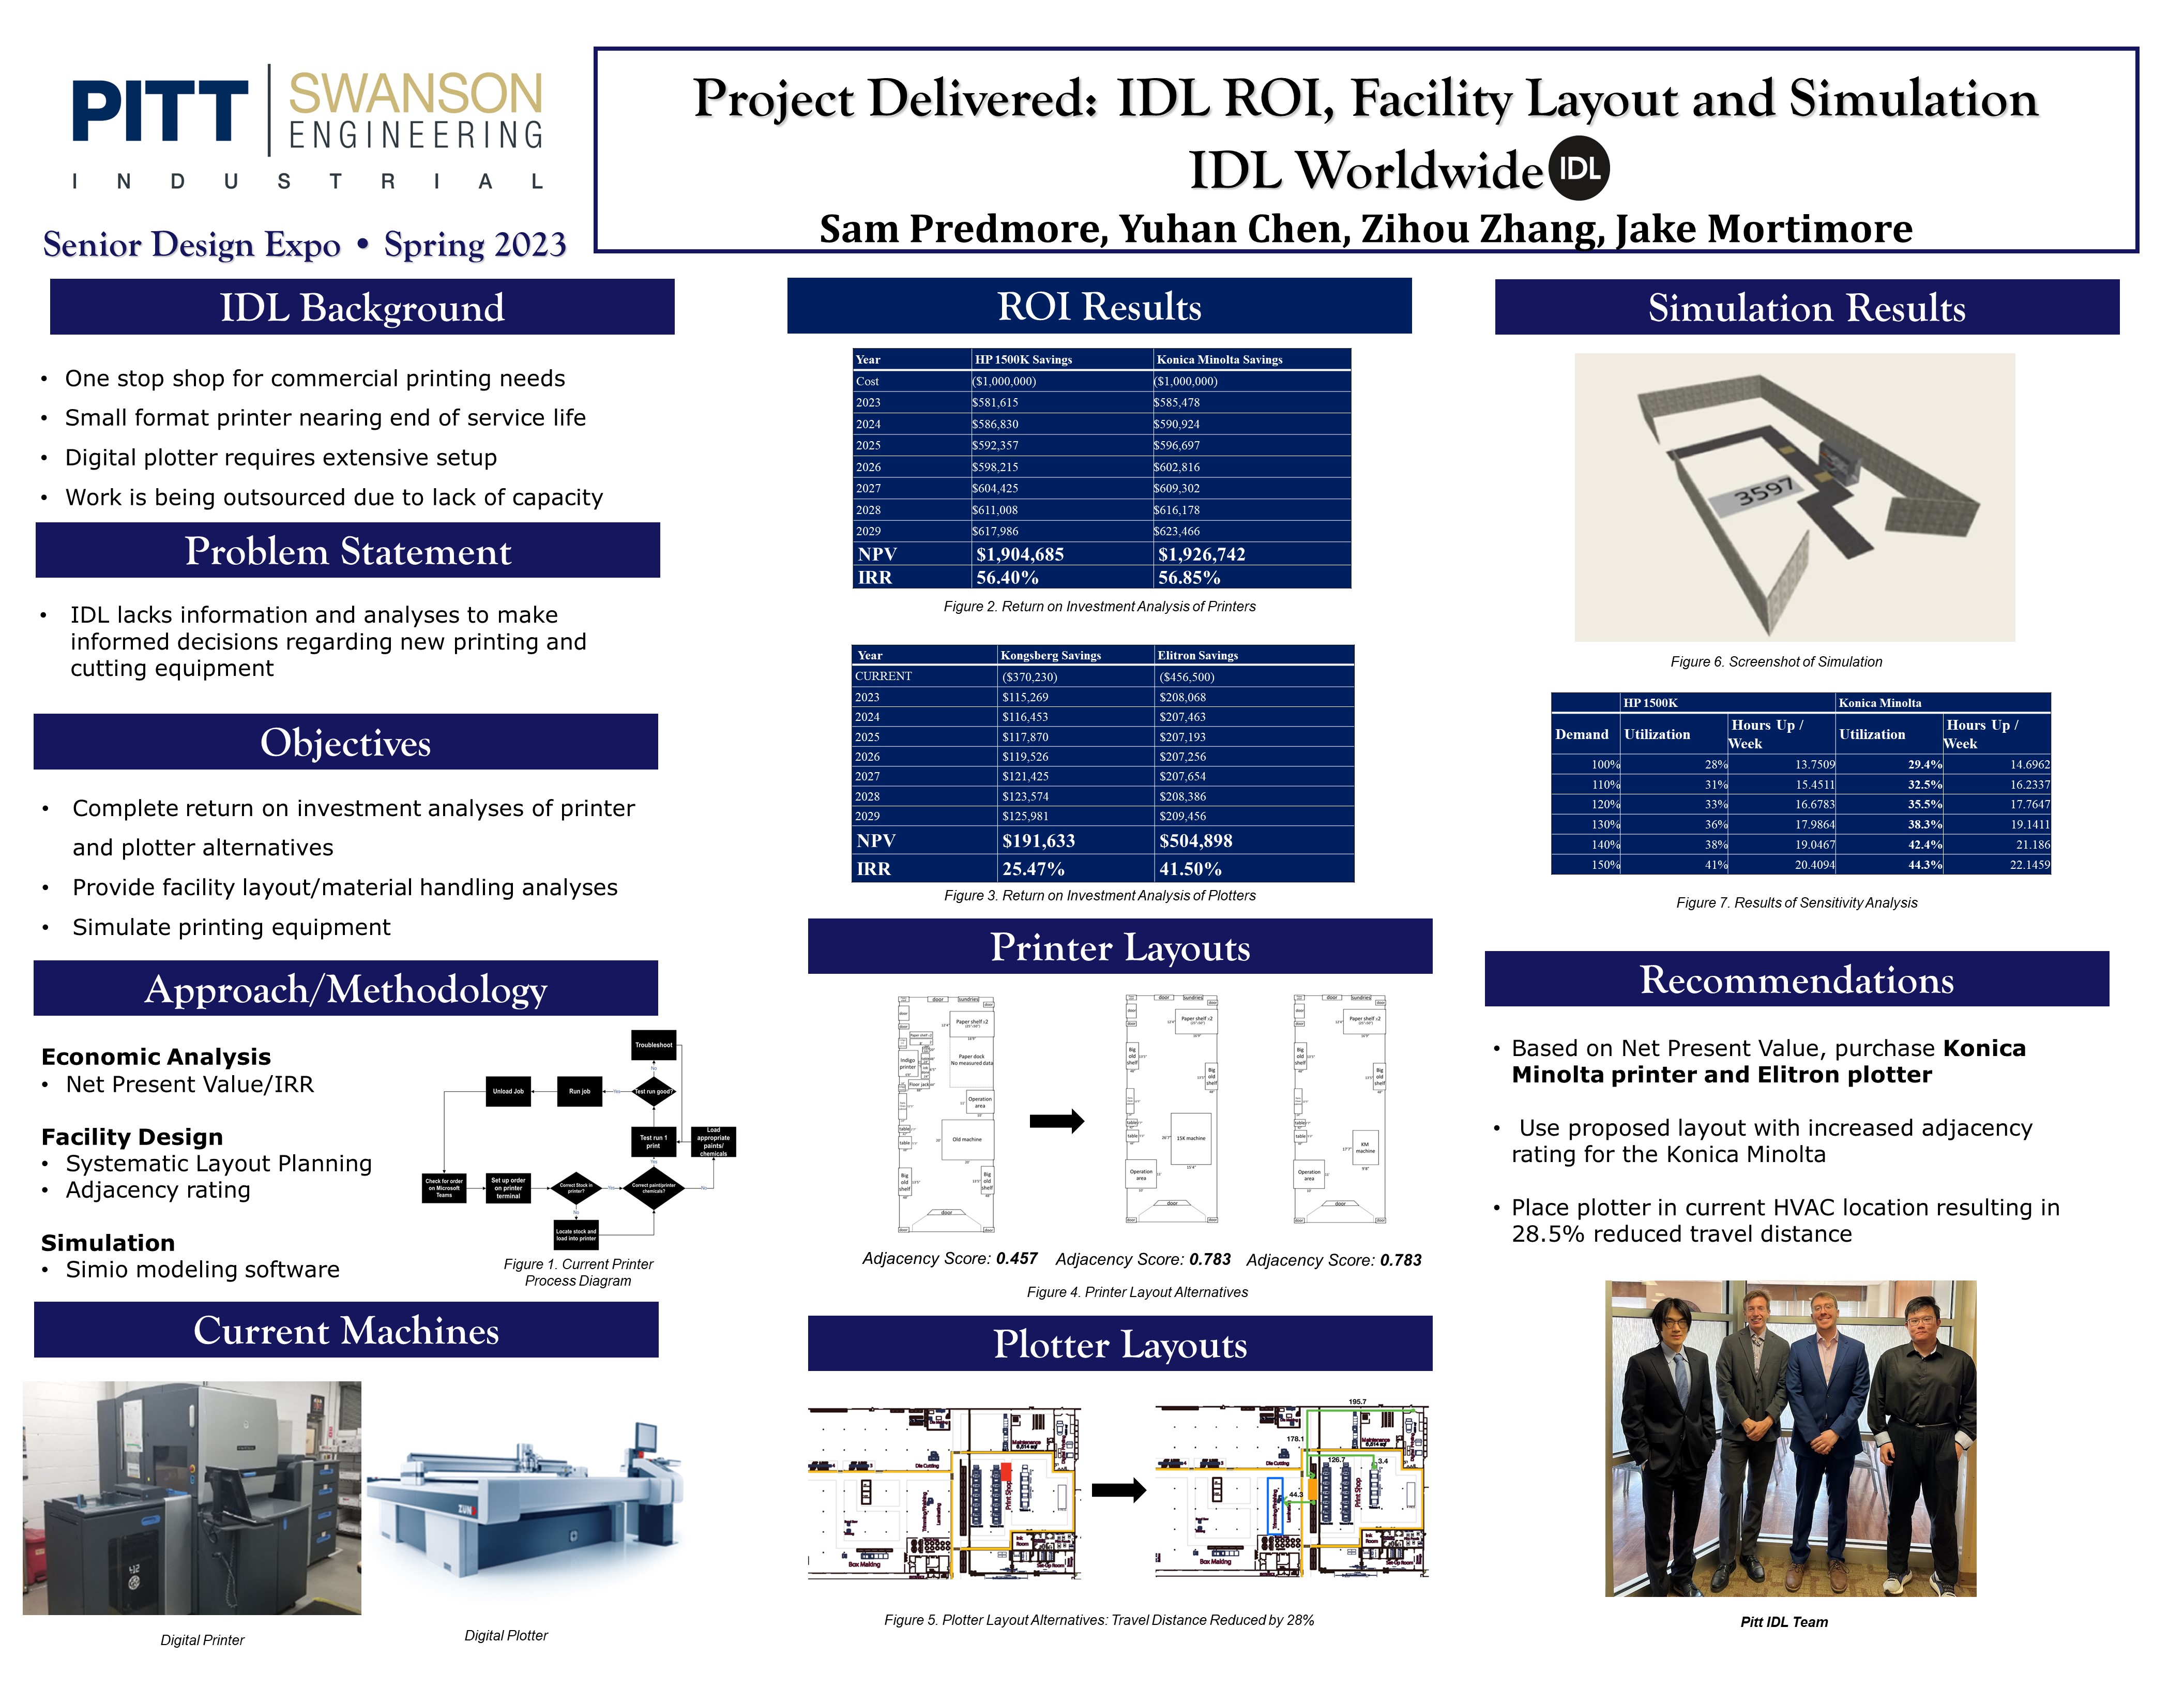 IDL ROI, facility layout and simulation research poster